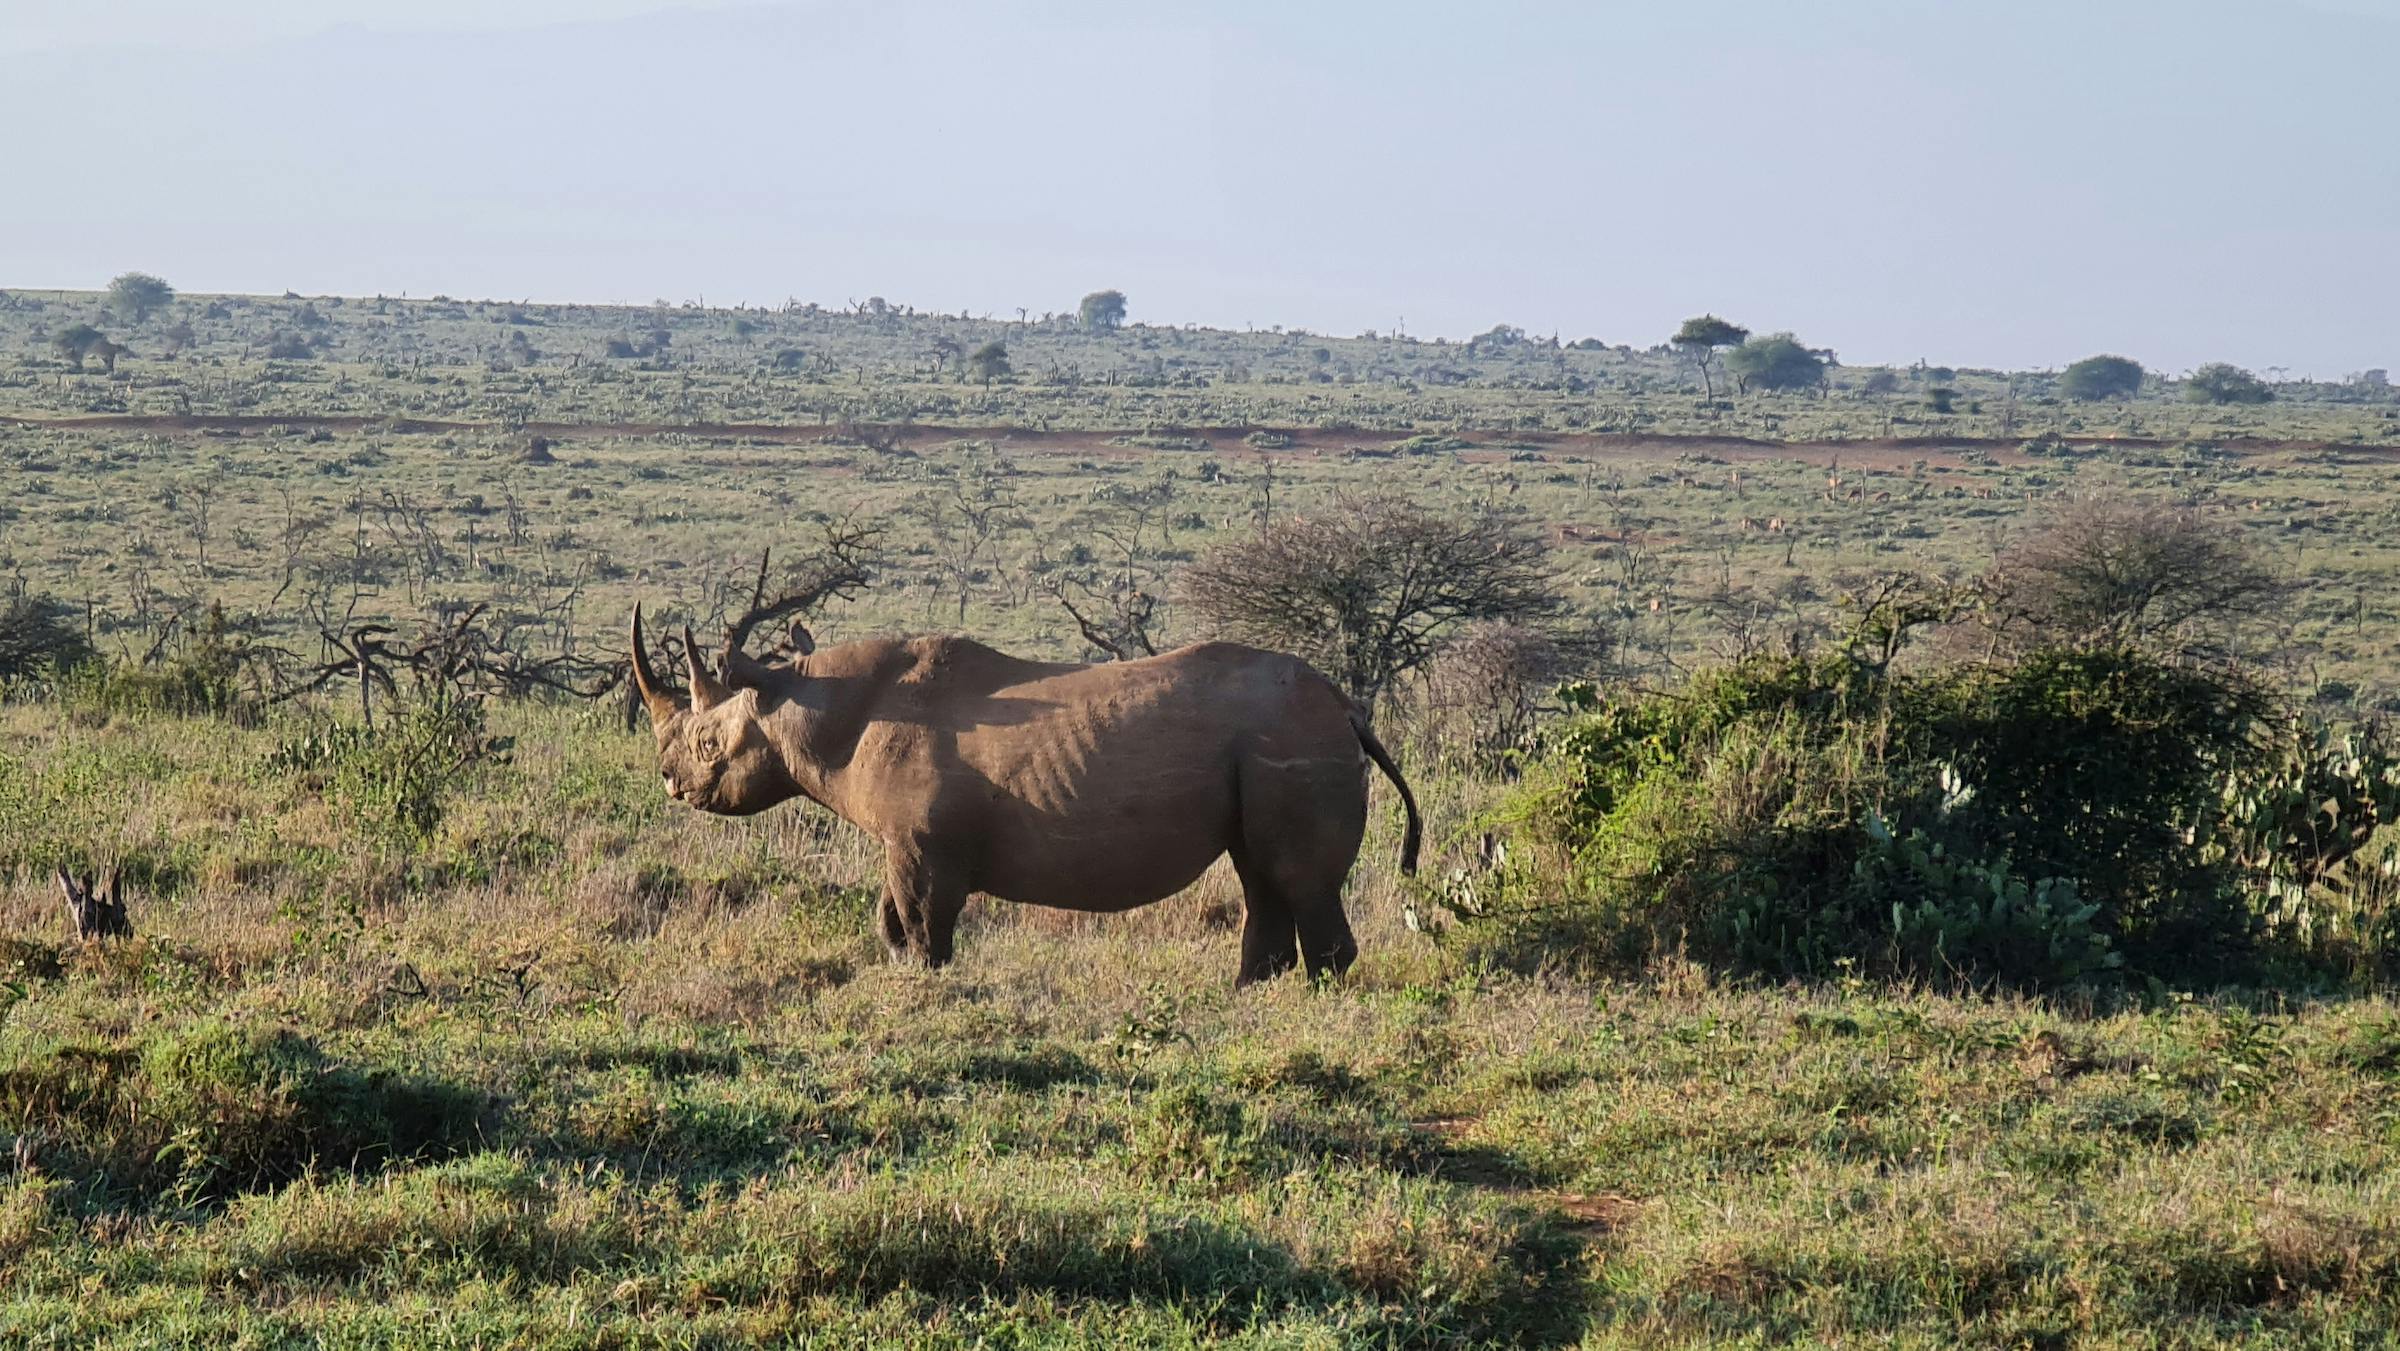 Improved Security and Monitoring of Black Rhinos in Tsavo West National Park’s Intensive Protection Zone